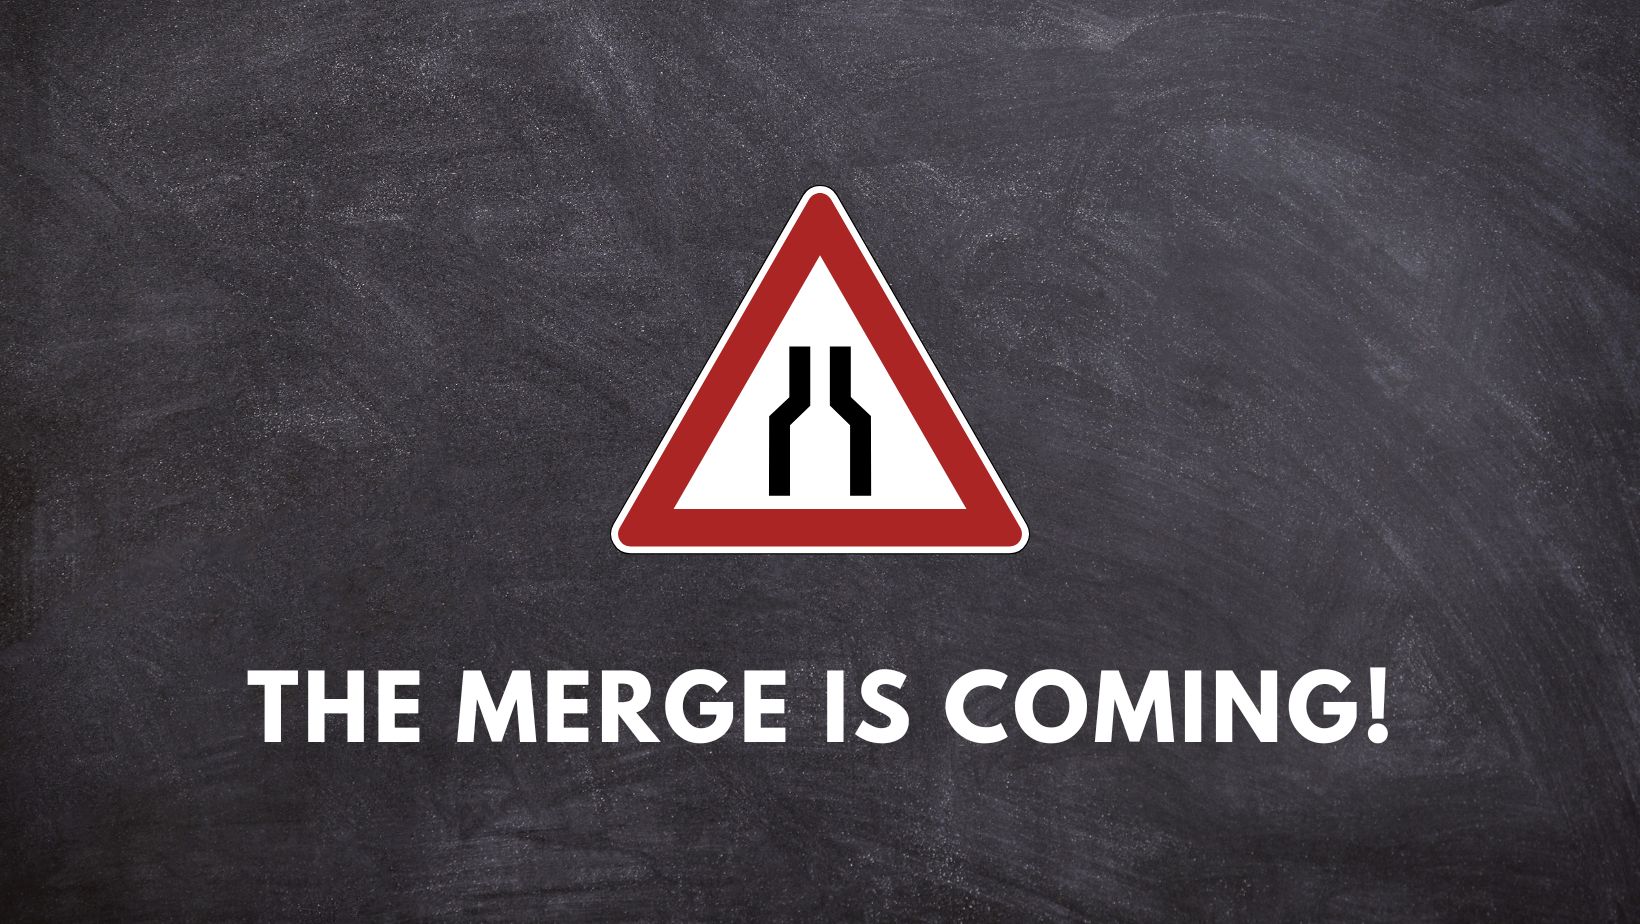 The merge is coming!